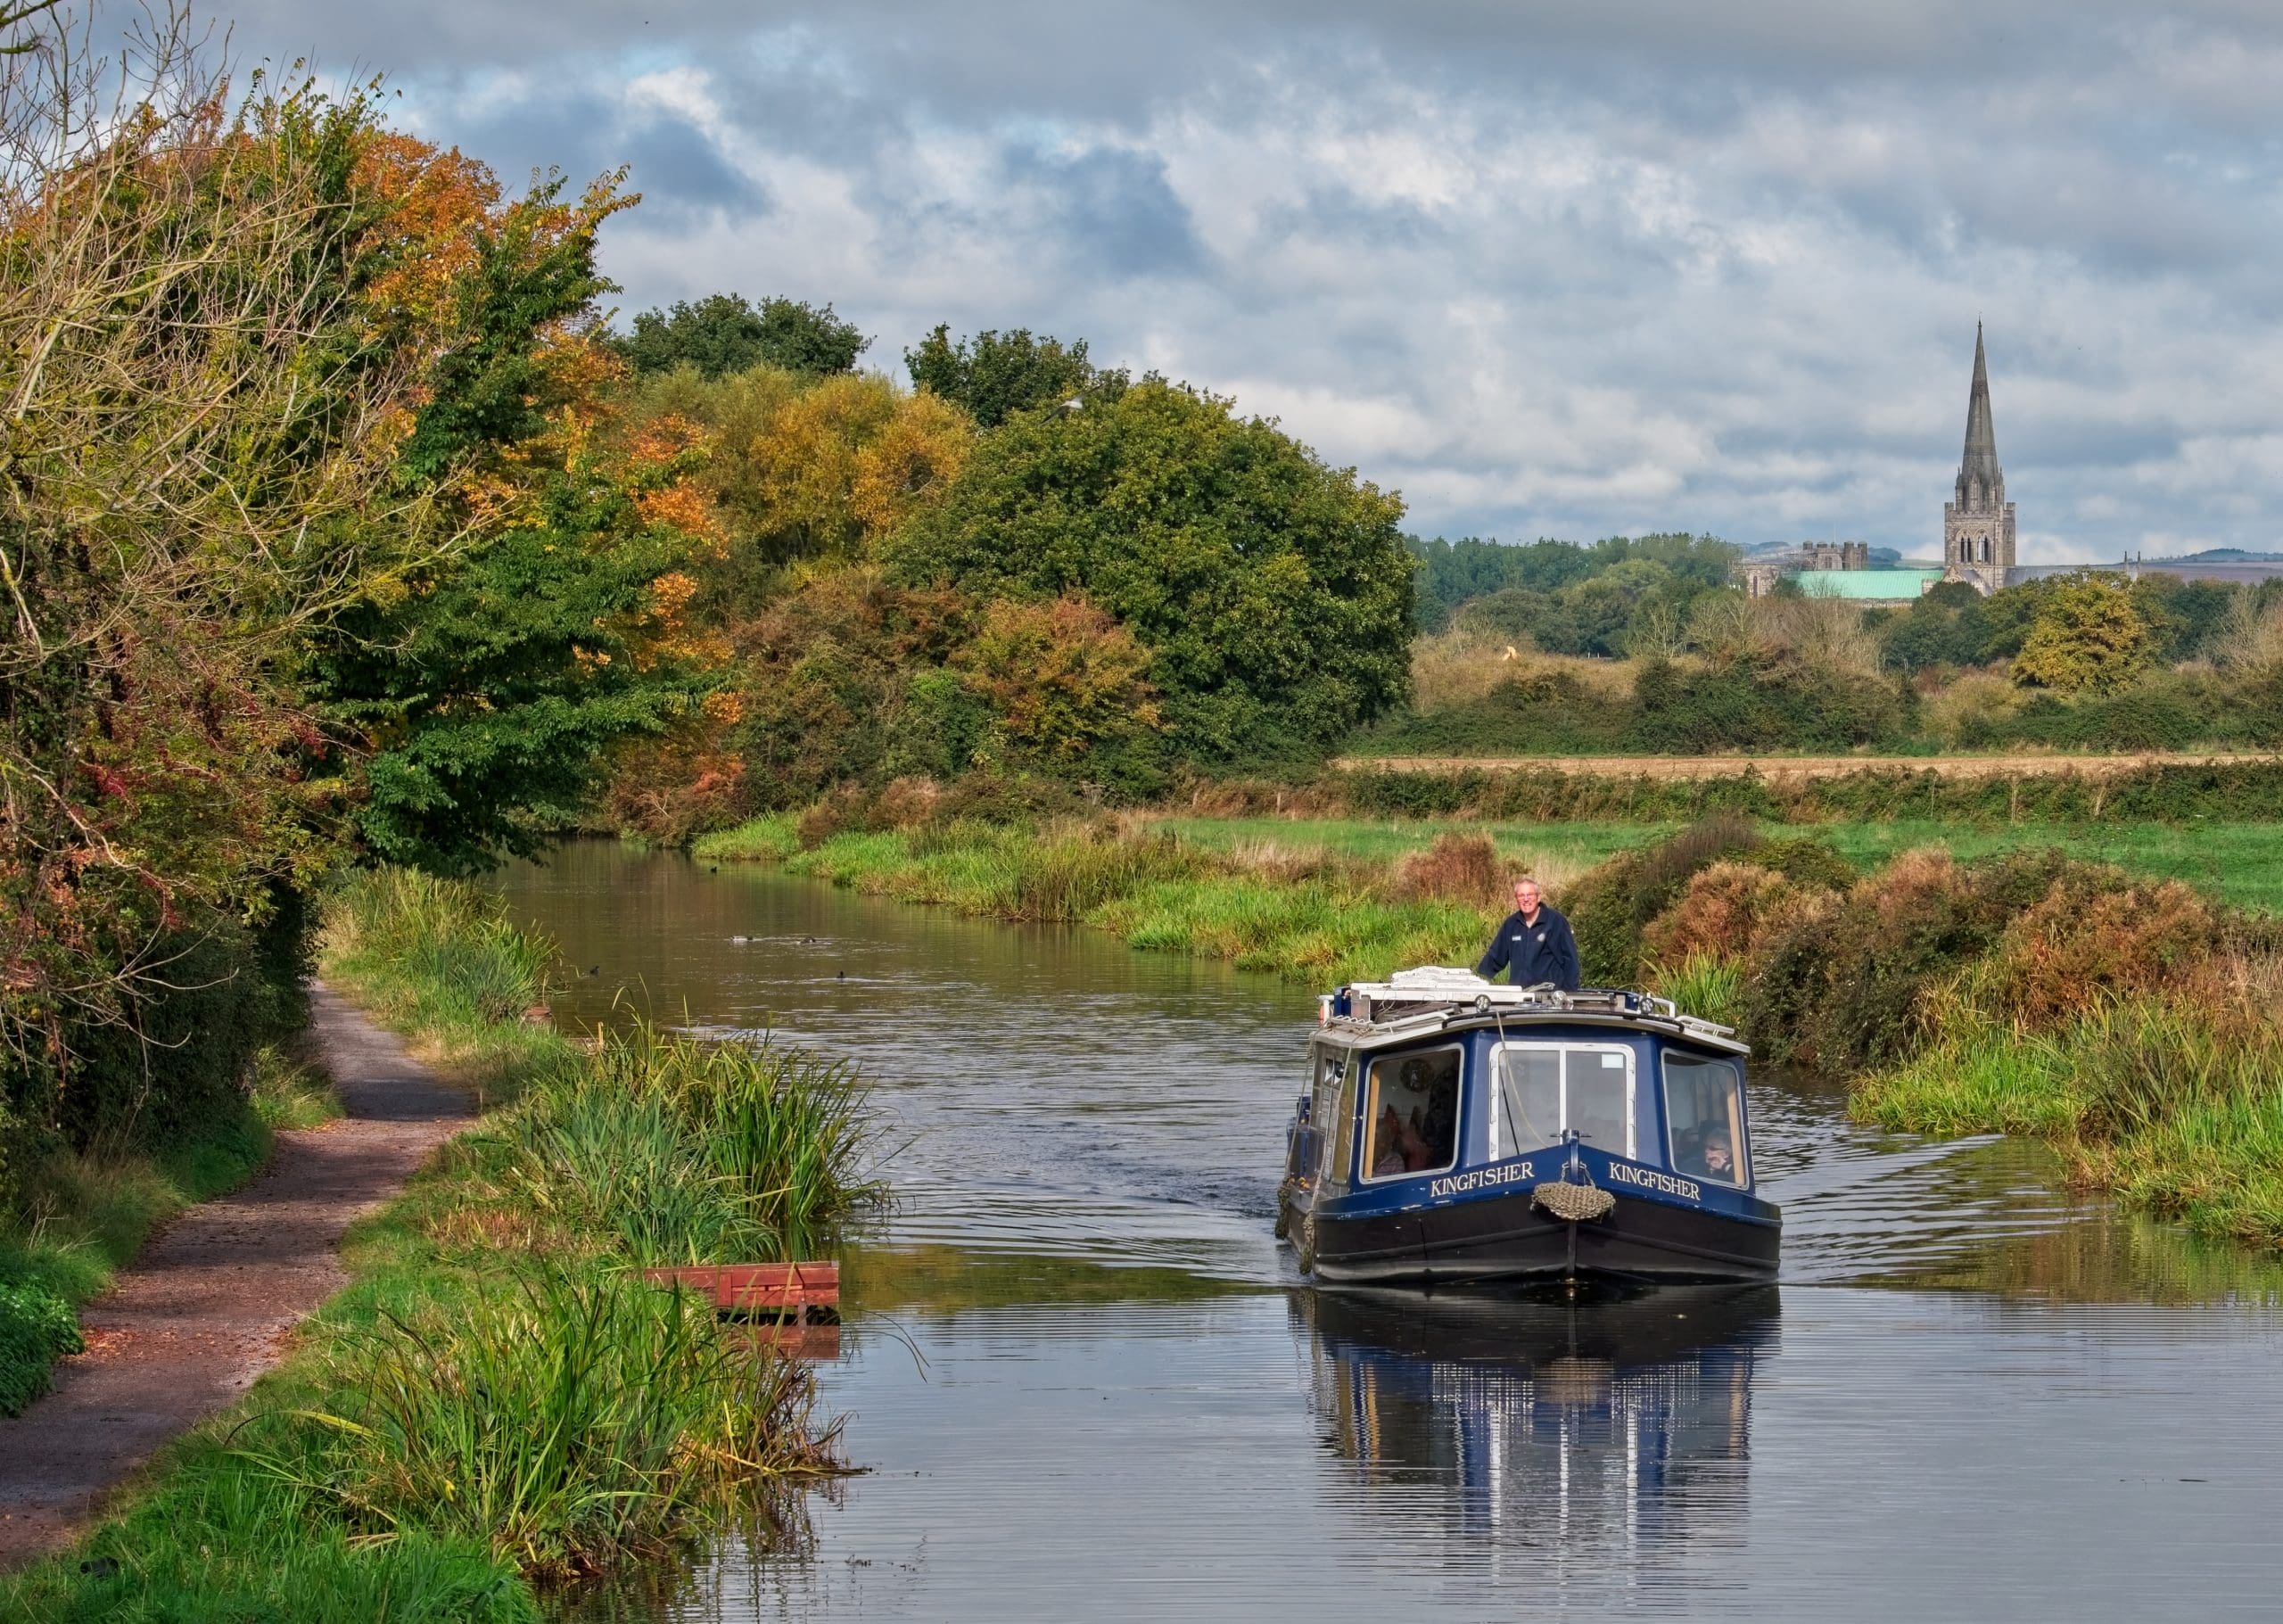 A boat on the Chichester Canal